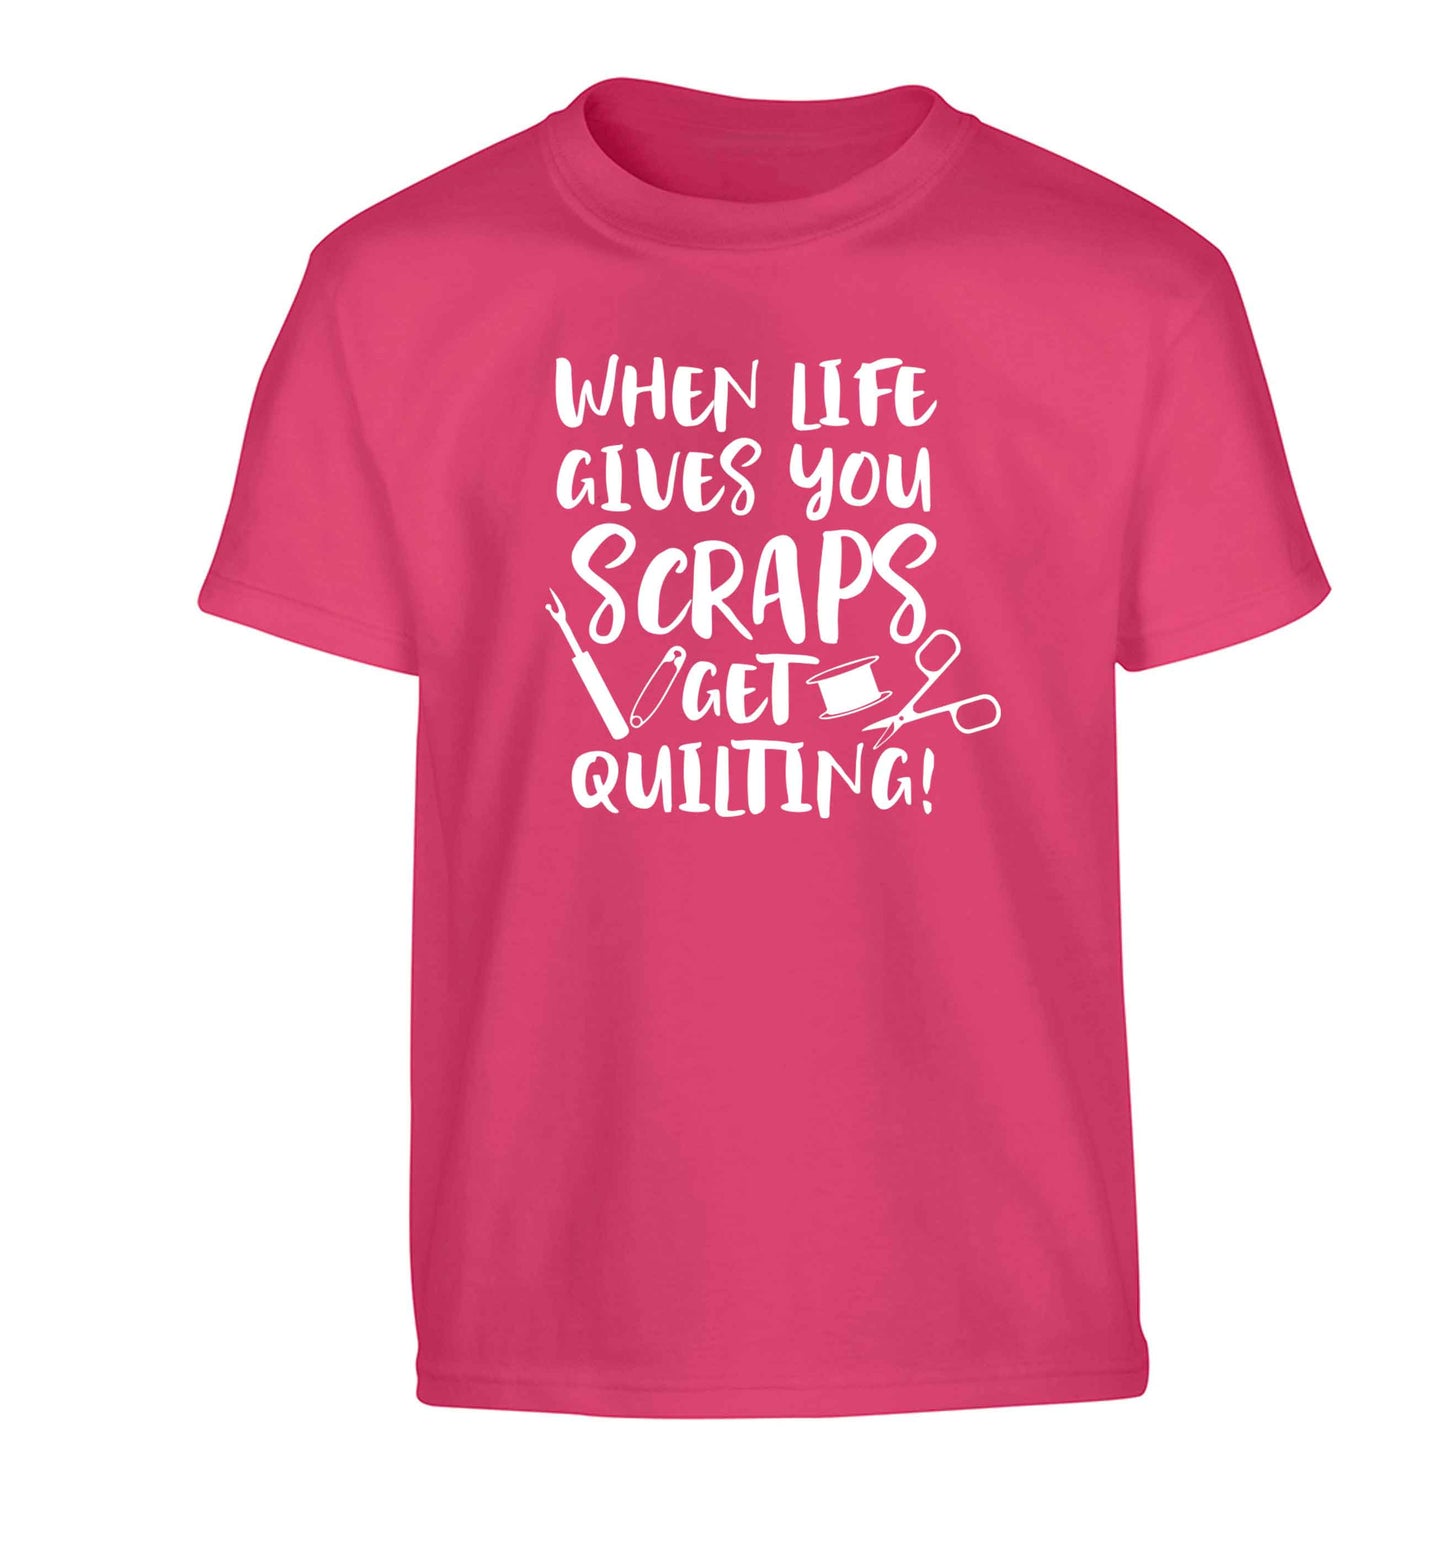 When life gives you scraps get quilting! Children's pink Tshirt 12-13 Years